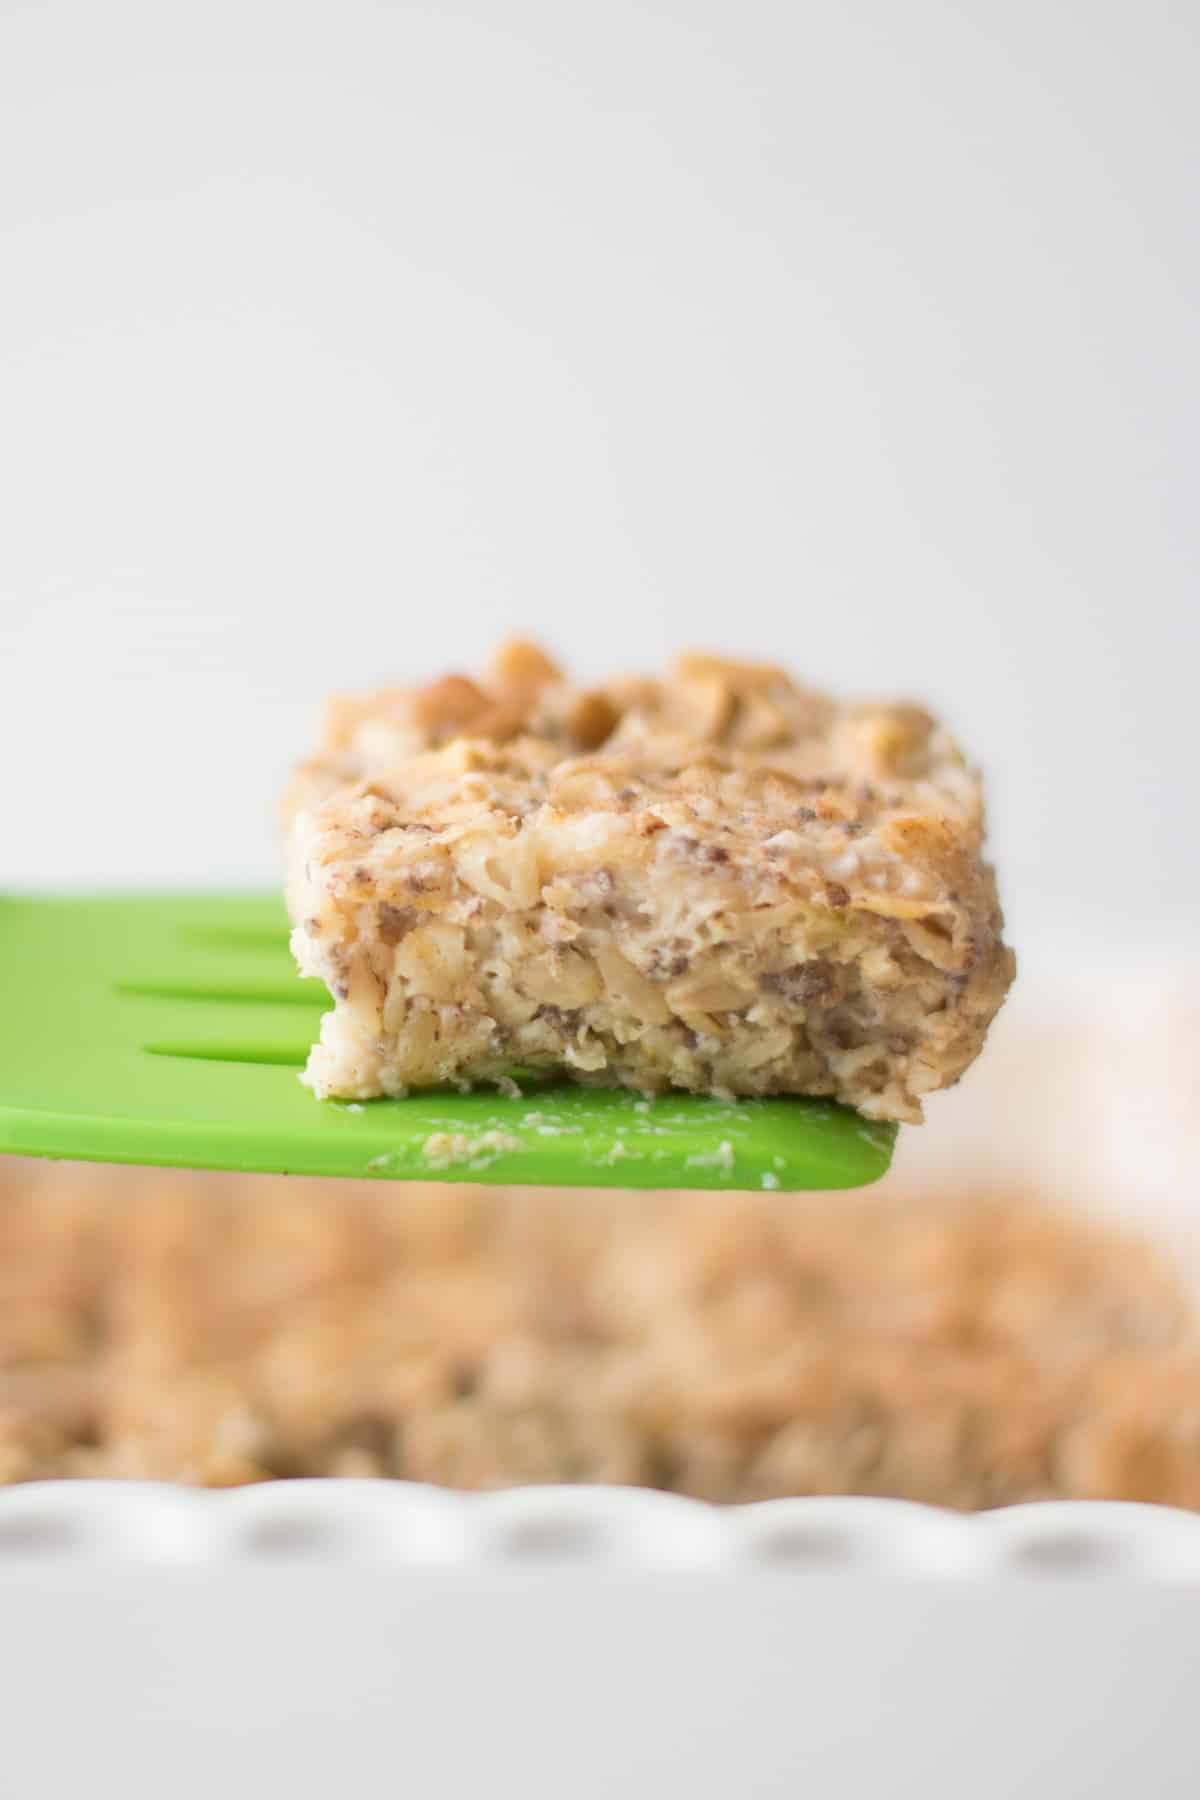 A slice of oatmeal lifted in the air by green spatula.